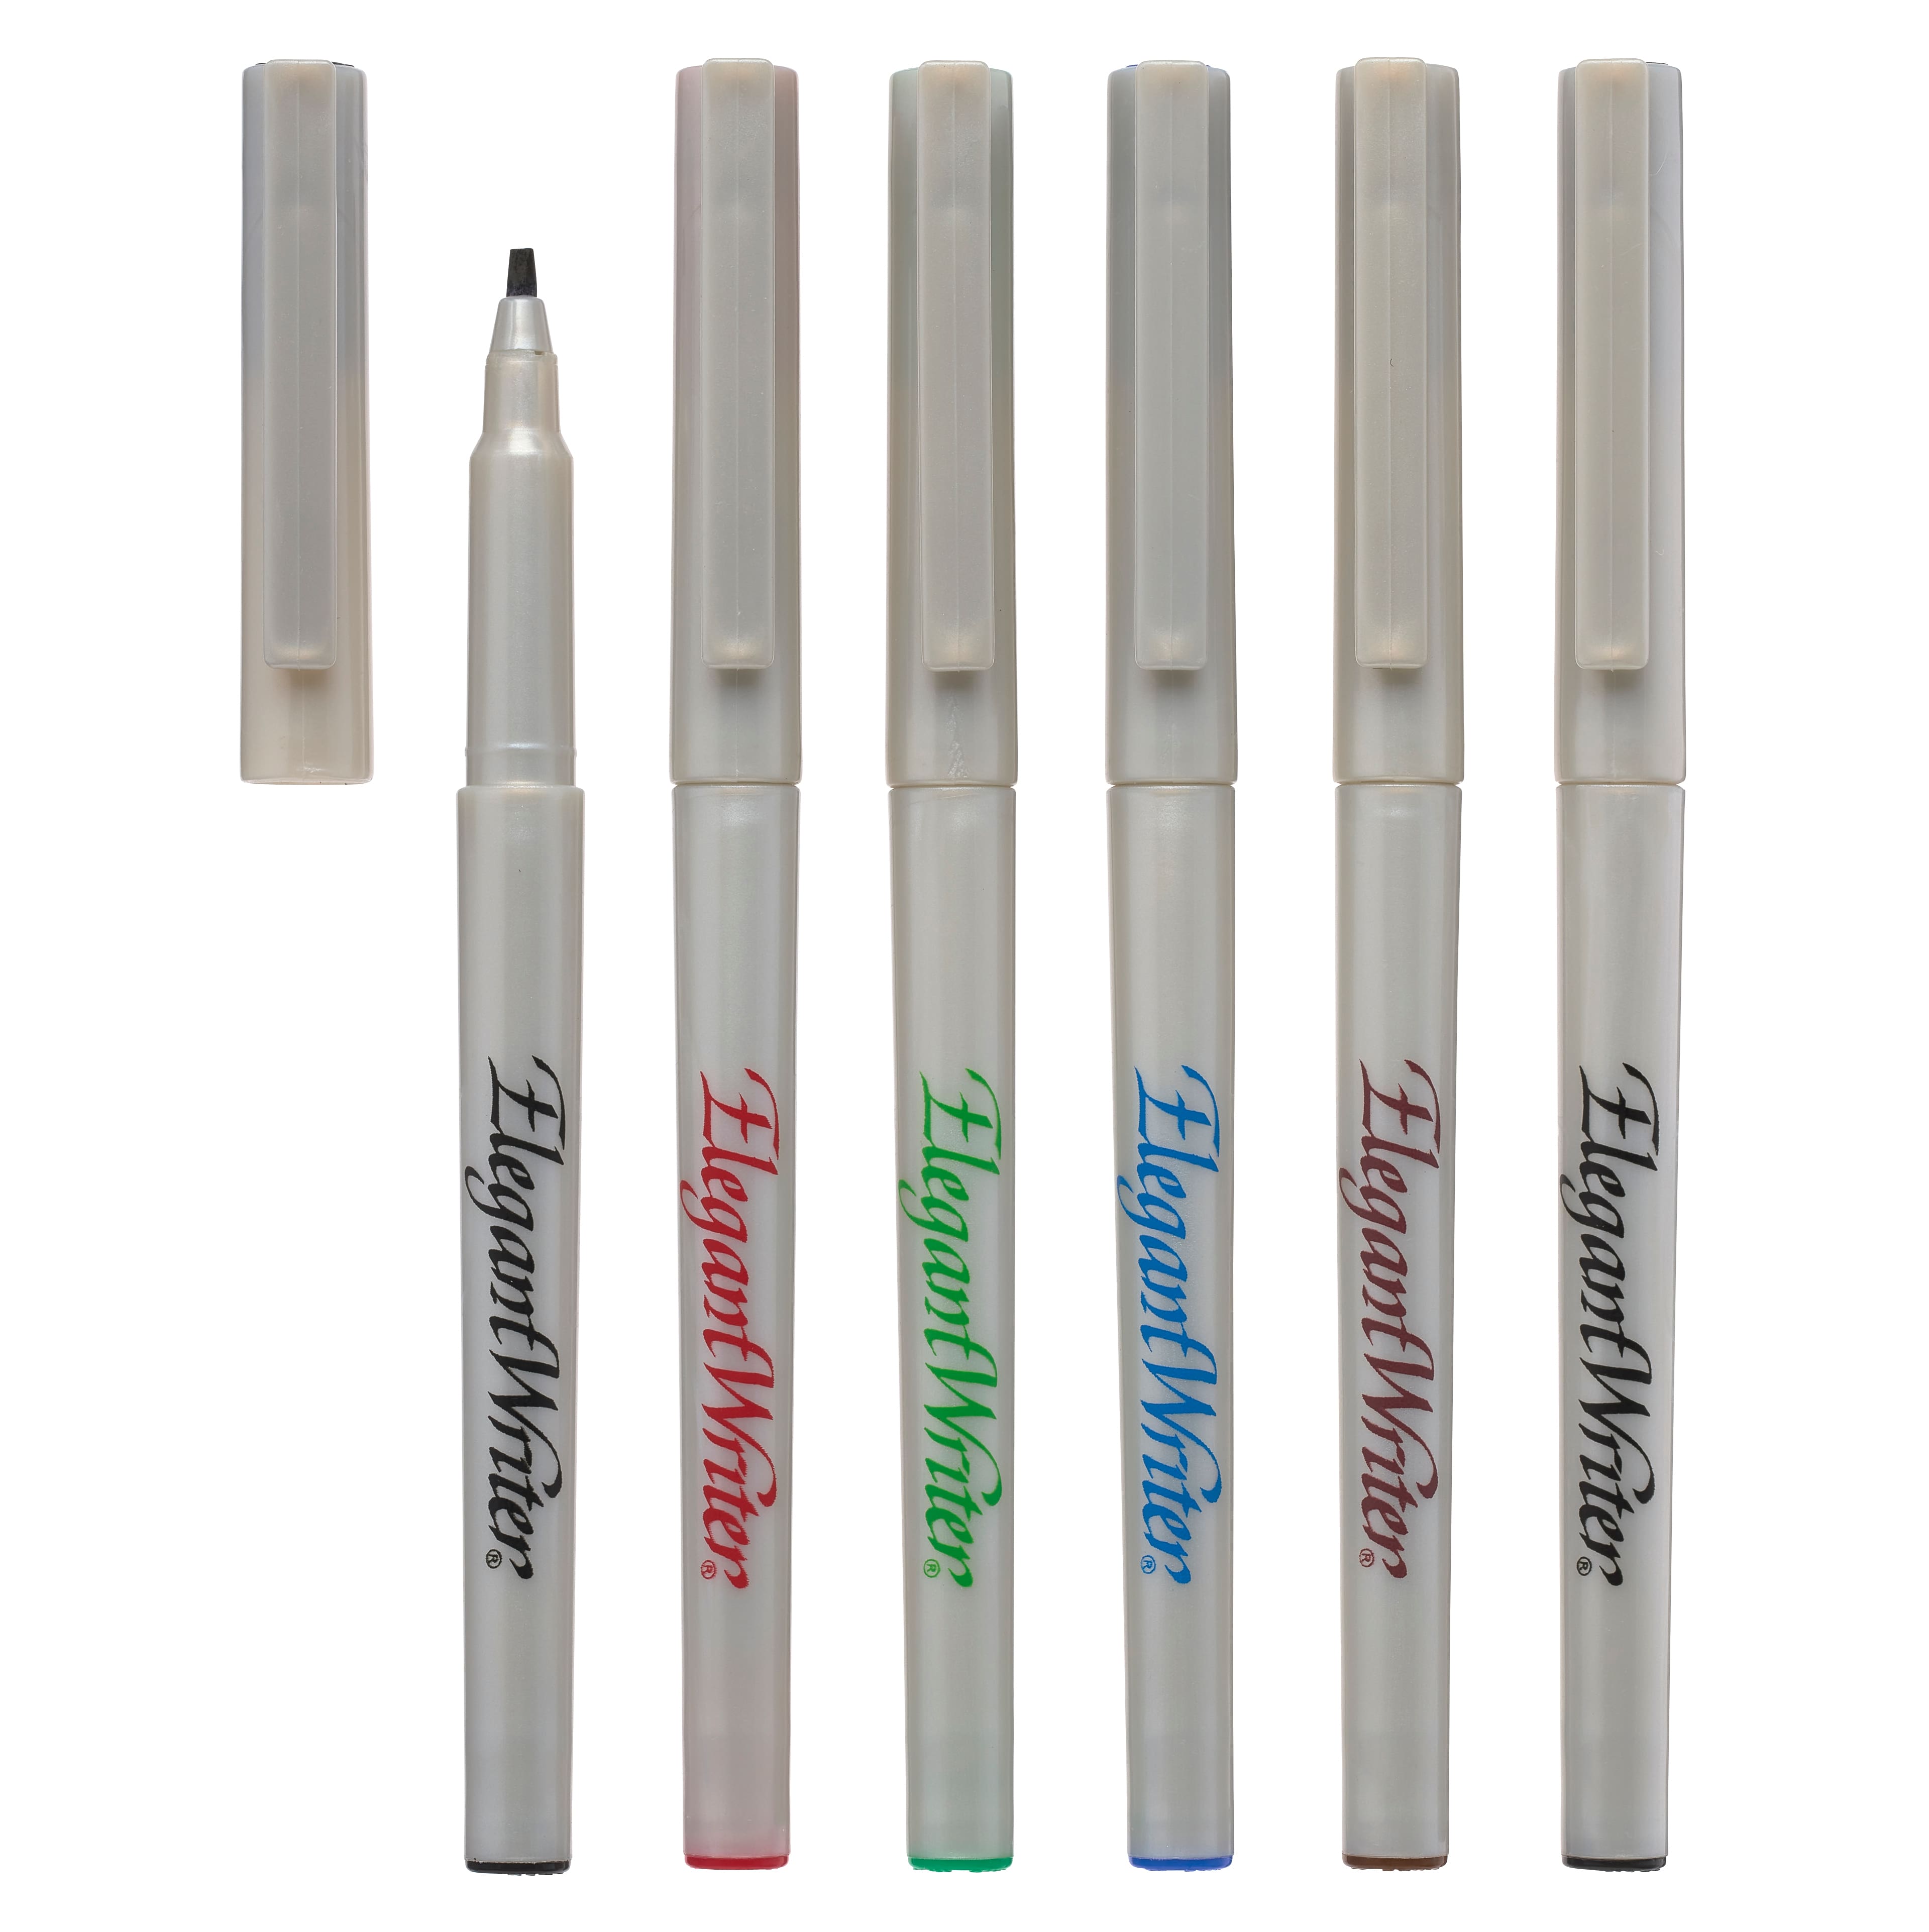 Master Qalam Calligraphy Marker 605 – Pack of 10 Markers – Happy Stationers